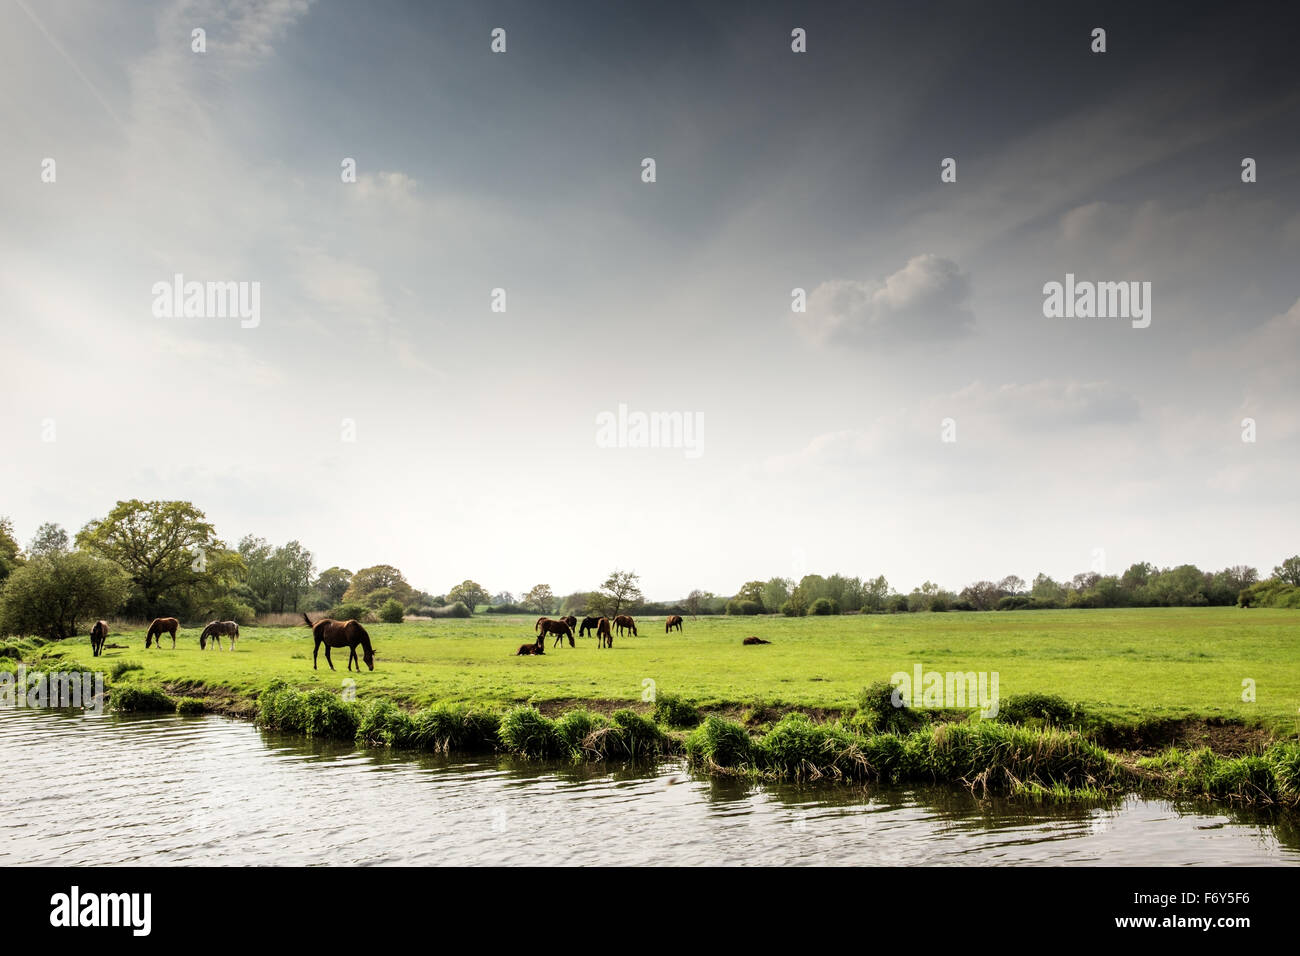 essex countryside  image with a group of horses near water Stock Photo